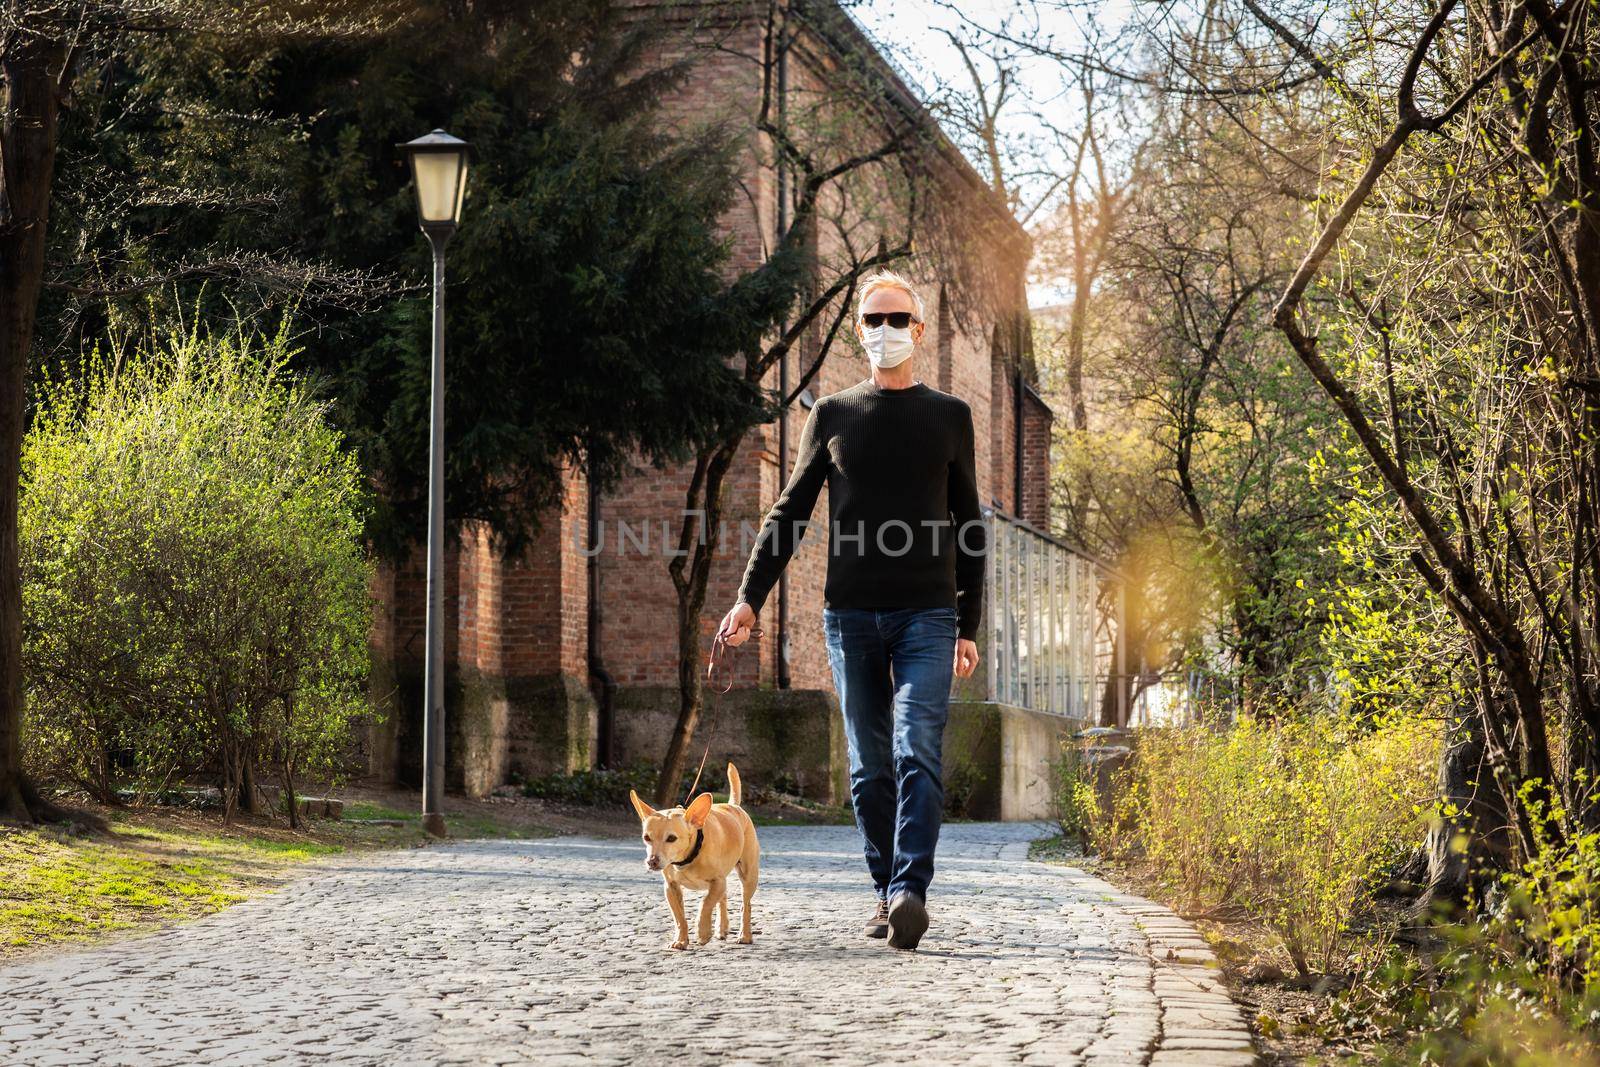 chihuahua dog  with owner wearing a face mask and  leash  walking together outdoors ,outside at the park